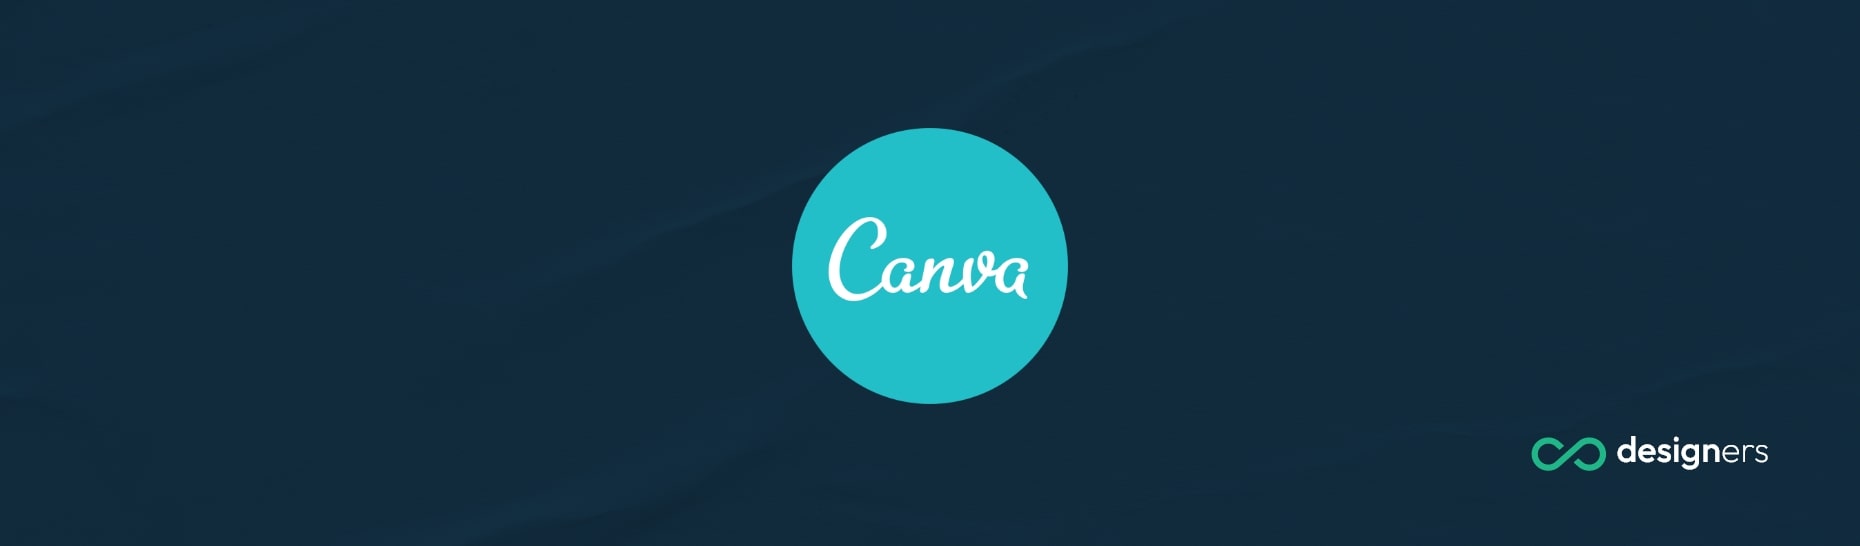 Is Canva a Good Product?